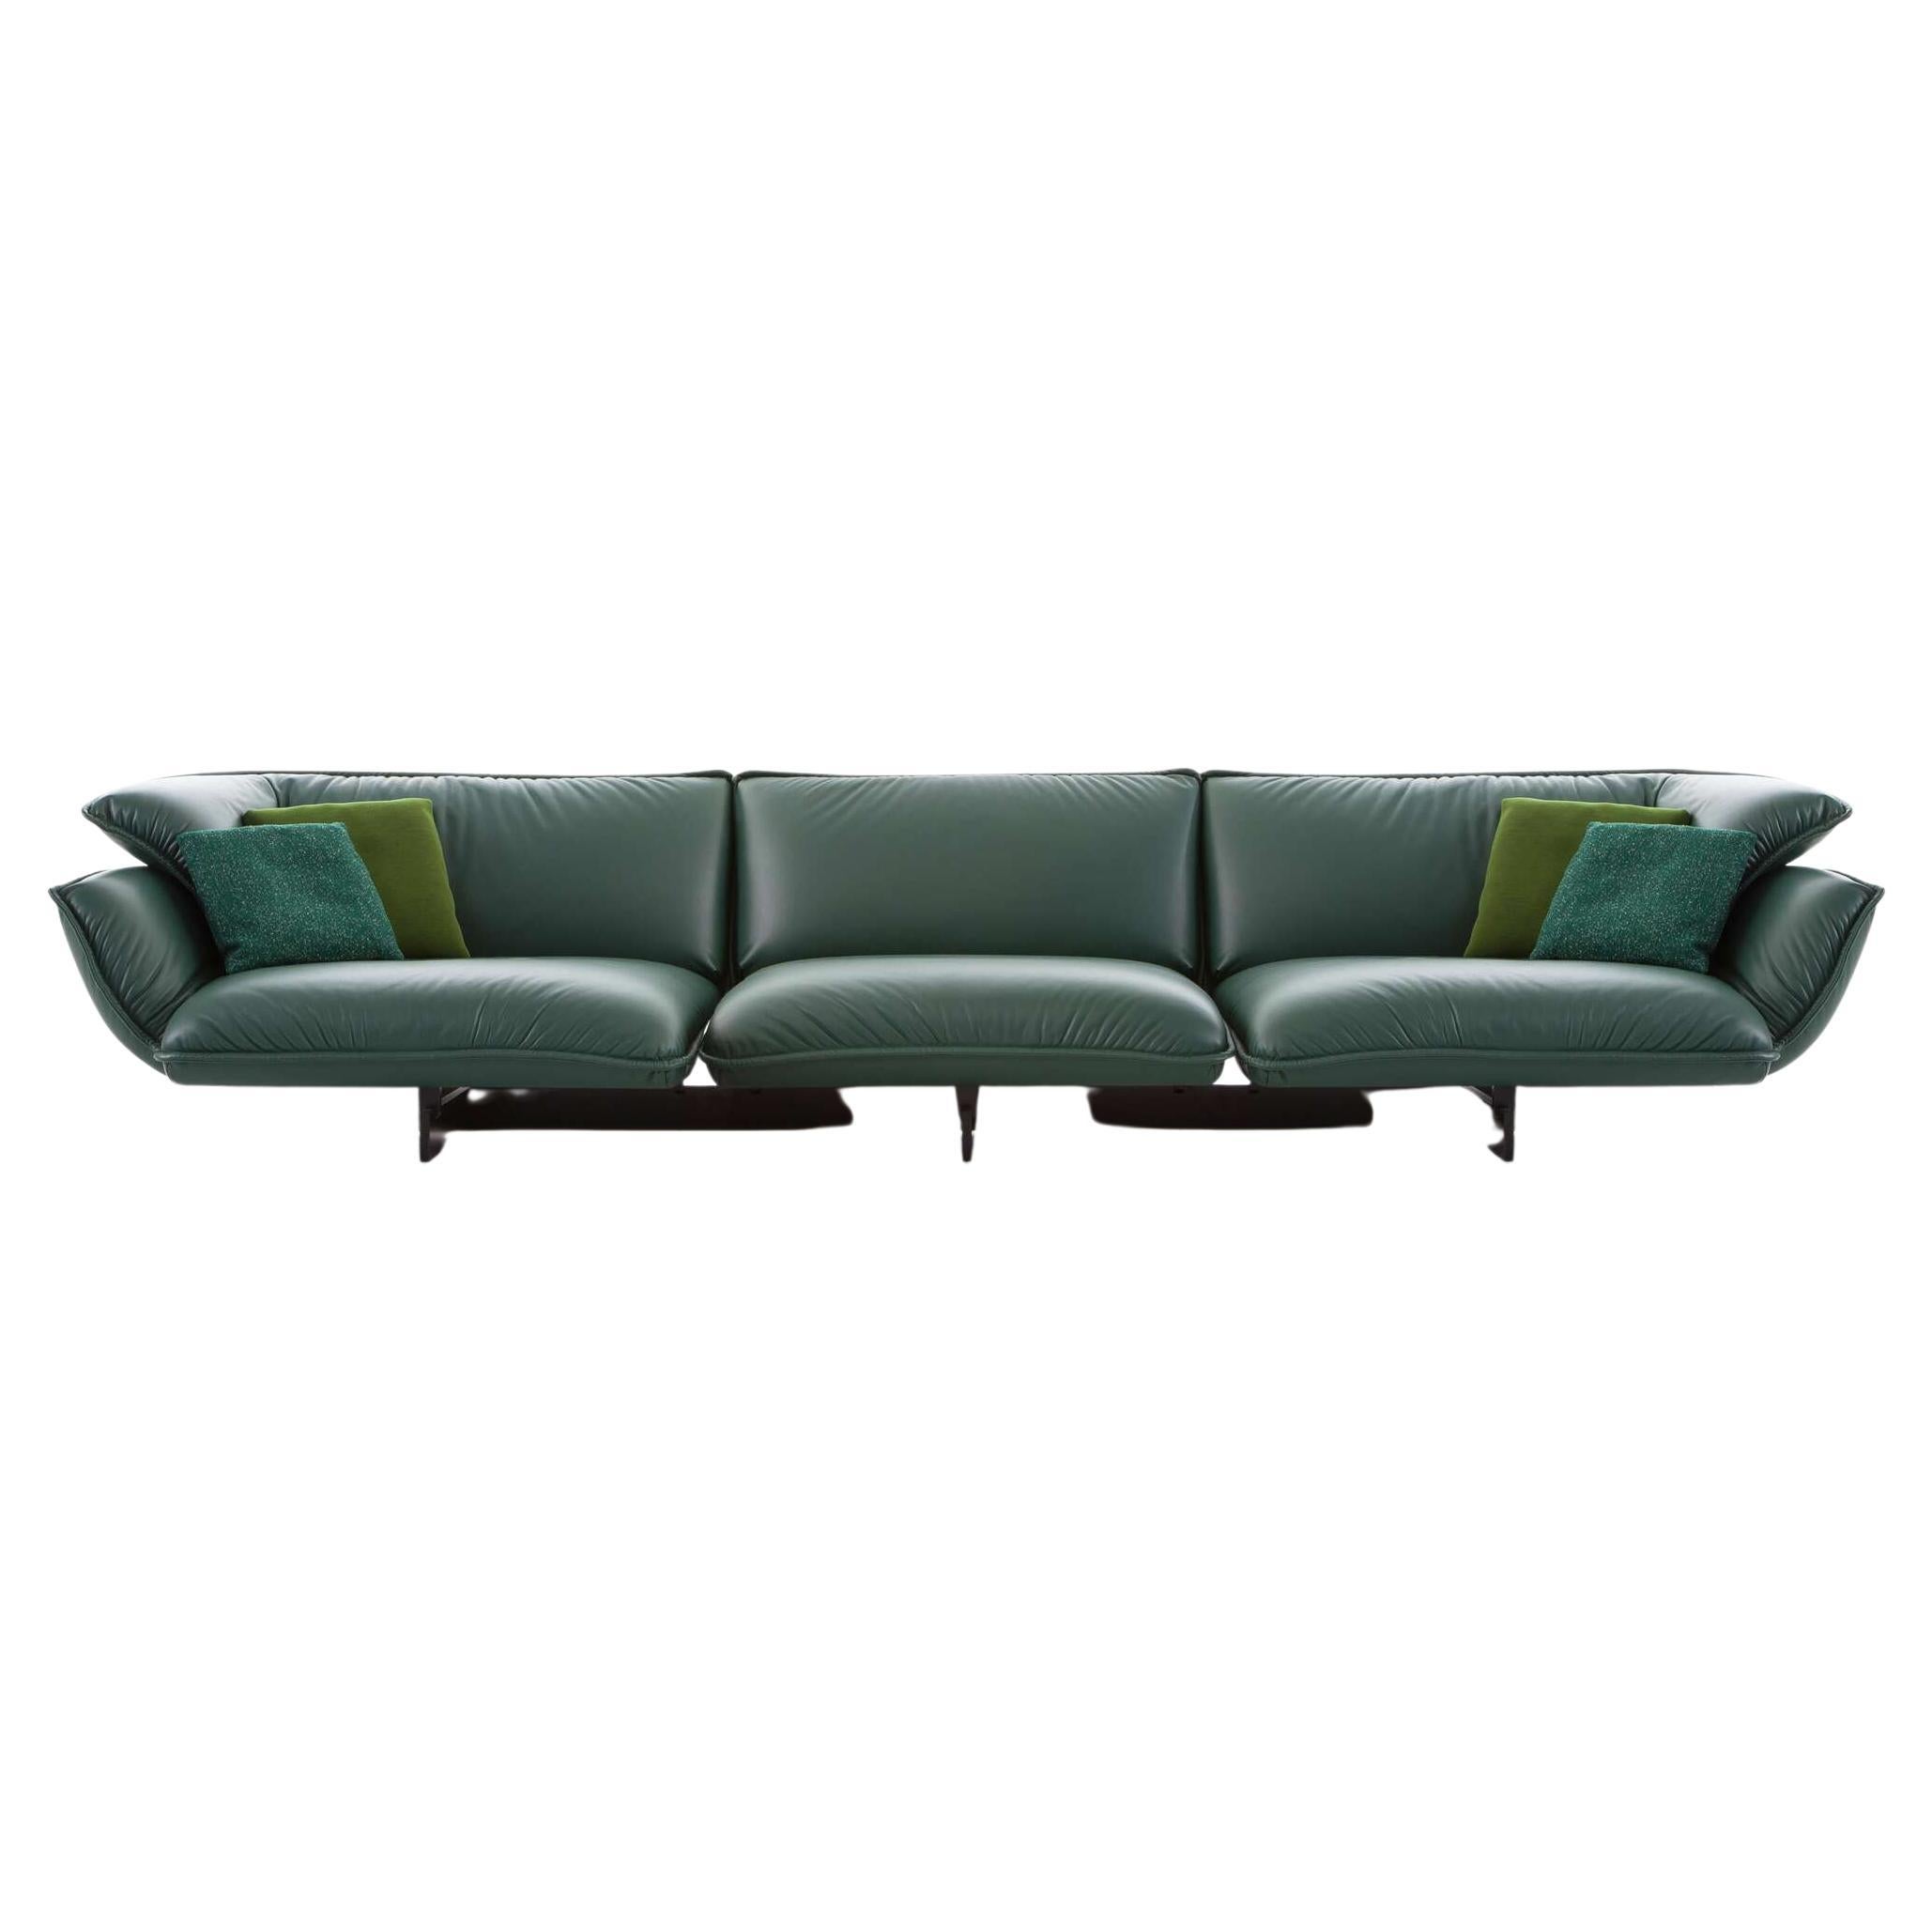 Modular sofa designed by Patricia Urquiola in 2016. Manufactured by Cassina in Italy. Prices are dependent on the color, material and size of the sofa. 